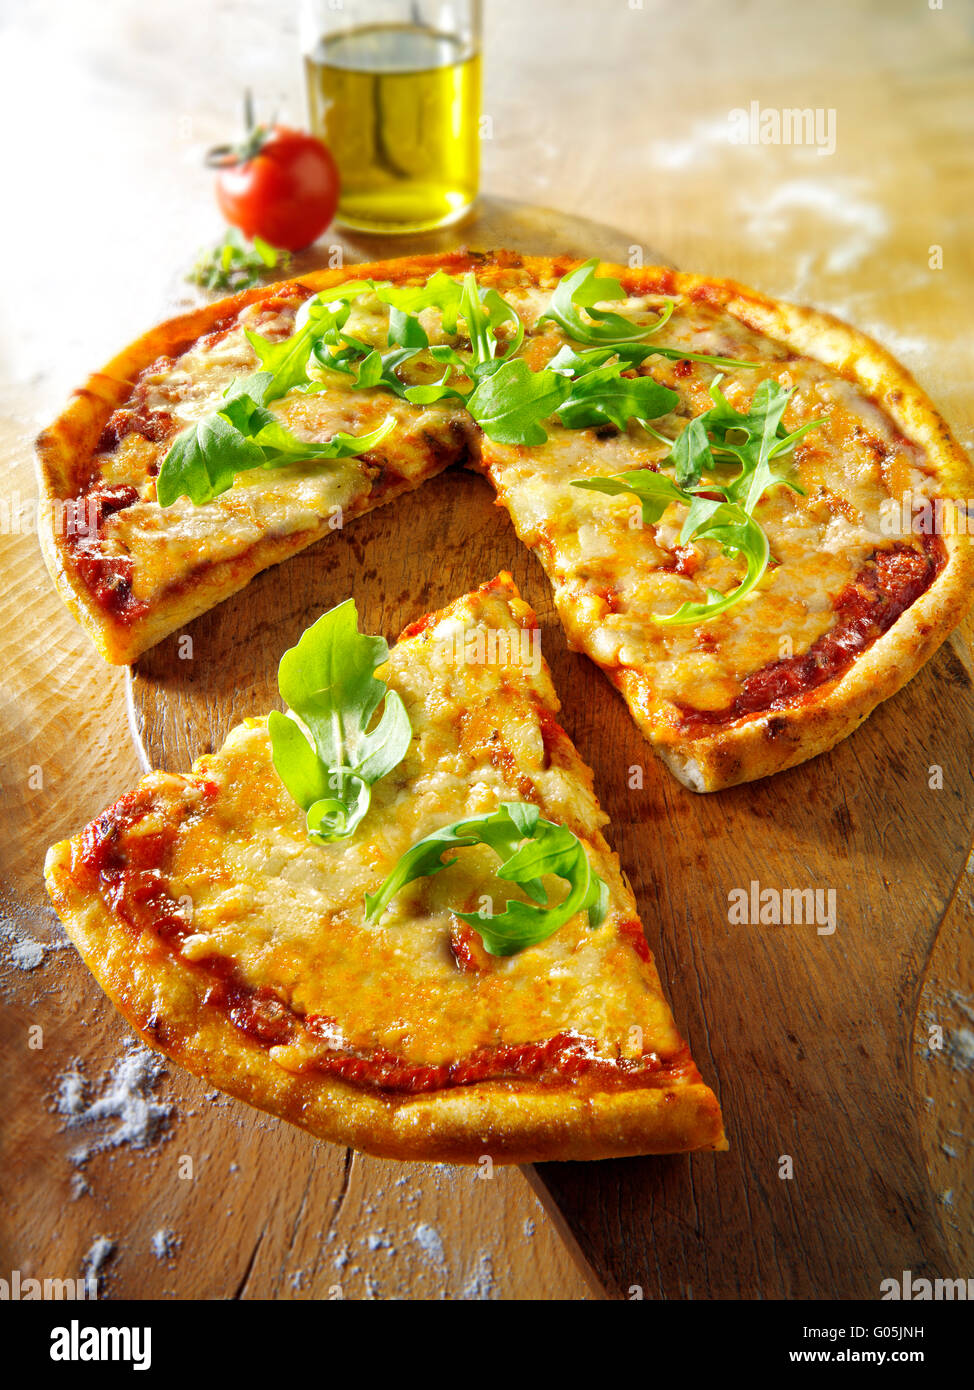 Cooked whole cheese and tomato Margherita pizza with rocket and a cut slice Stock Photo